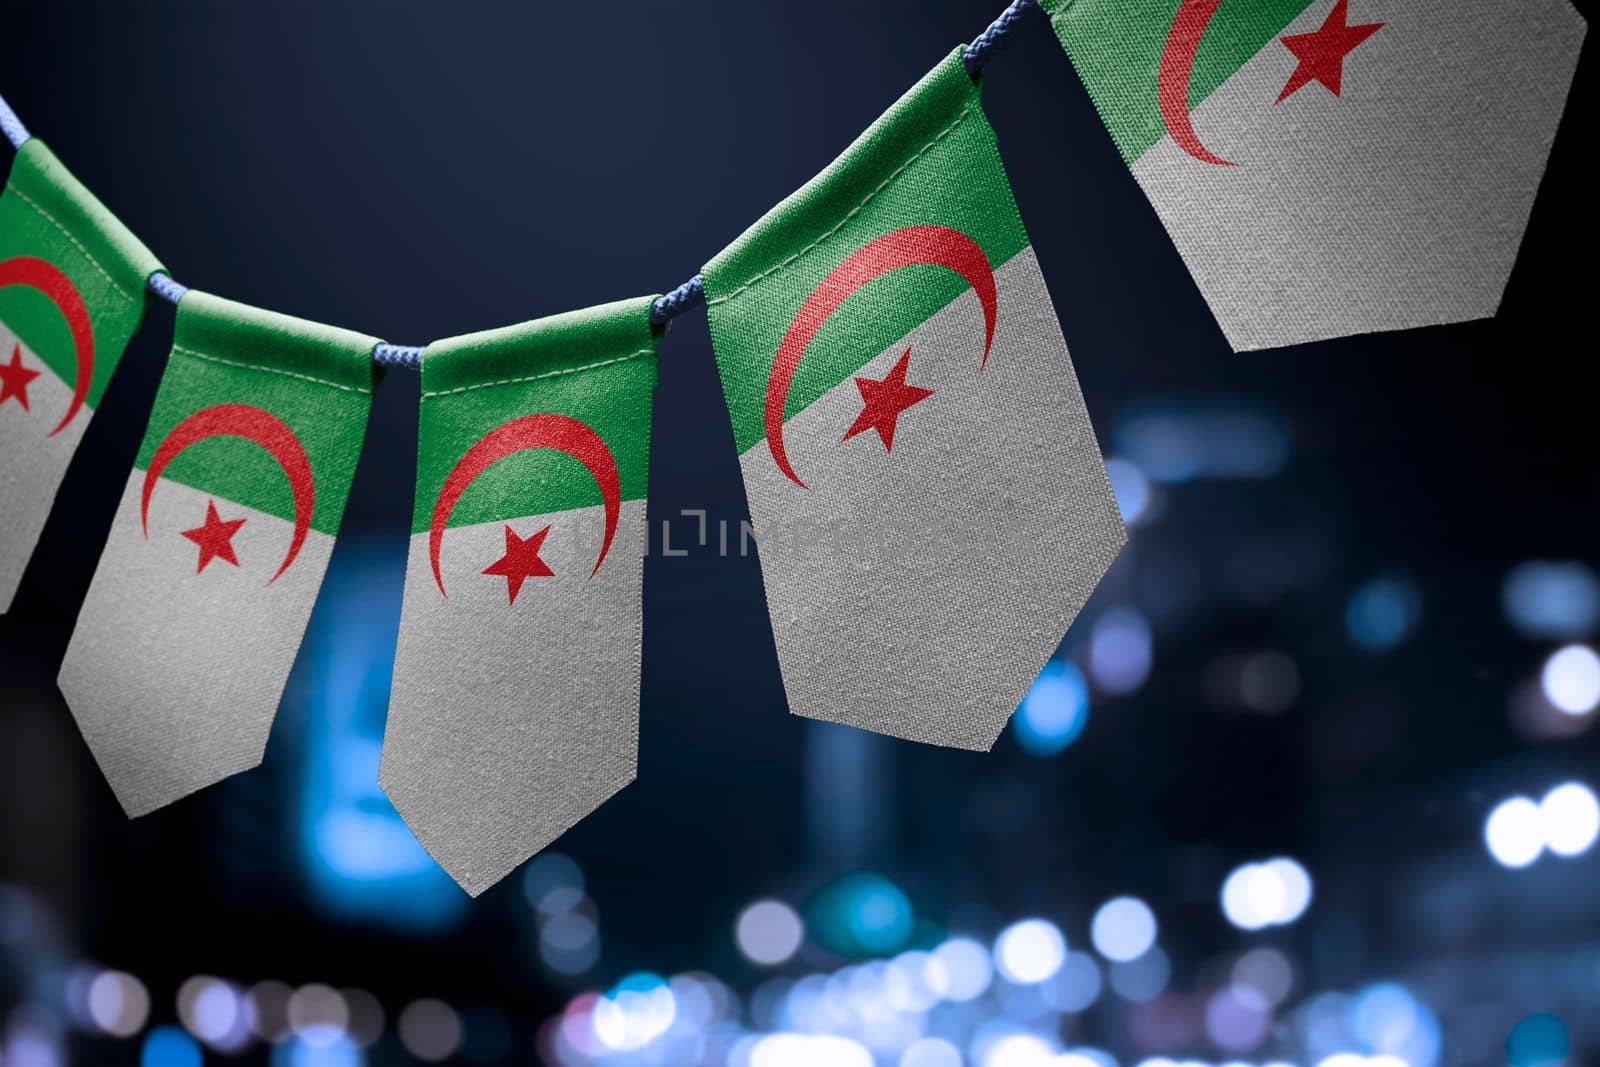 A garland of Algeria national flags on an abstract blurred background.